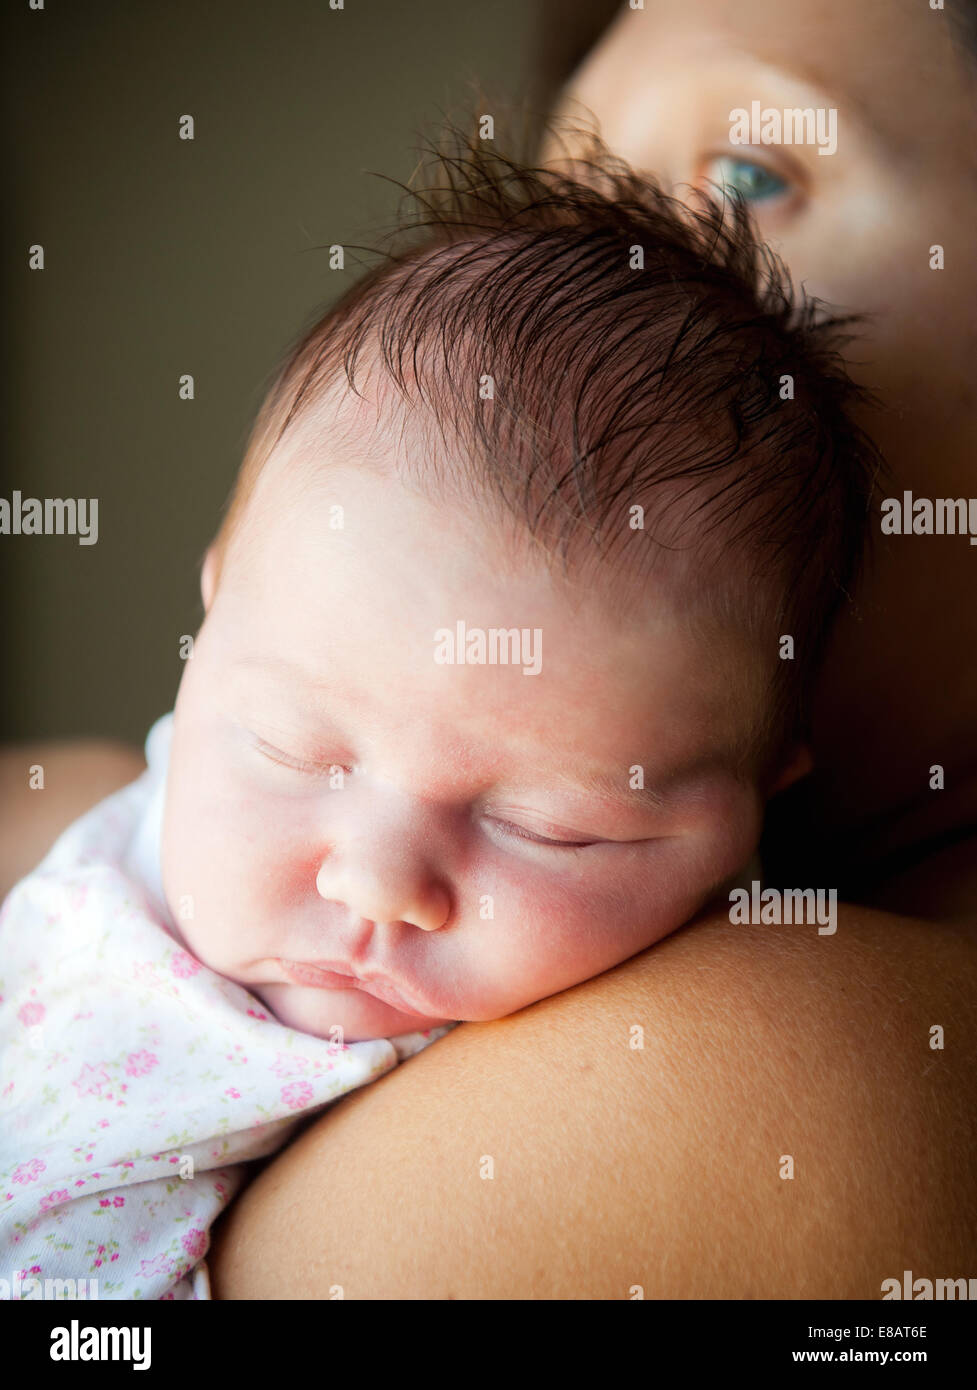 Newborn baby in the arms of his mother Stock Photo